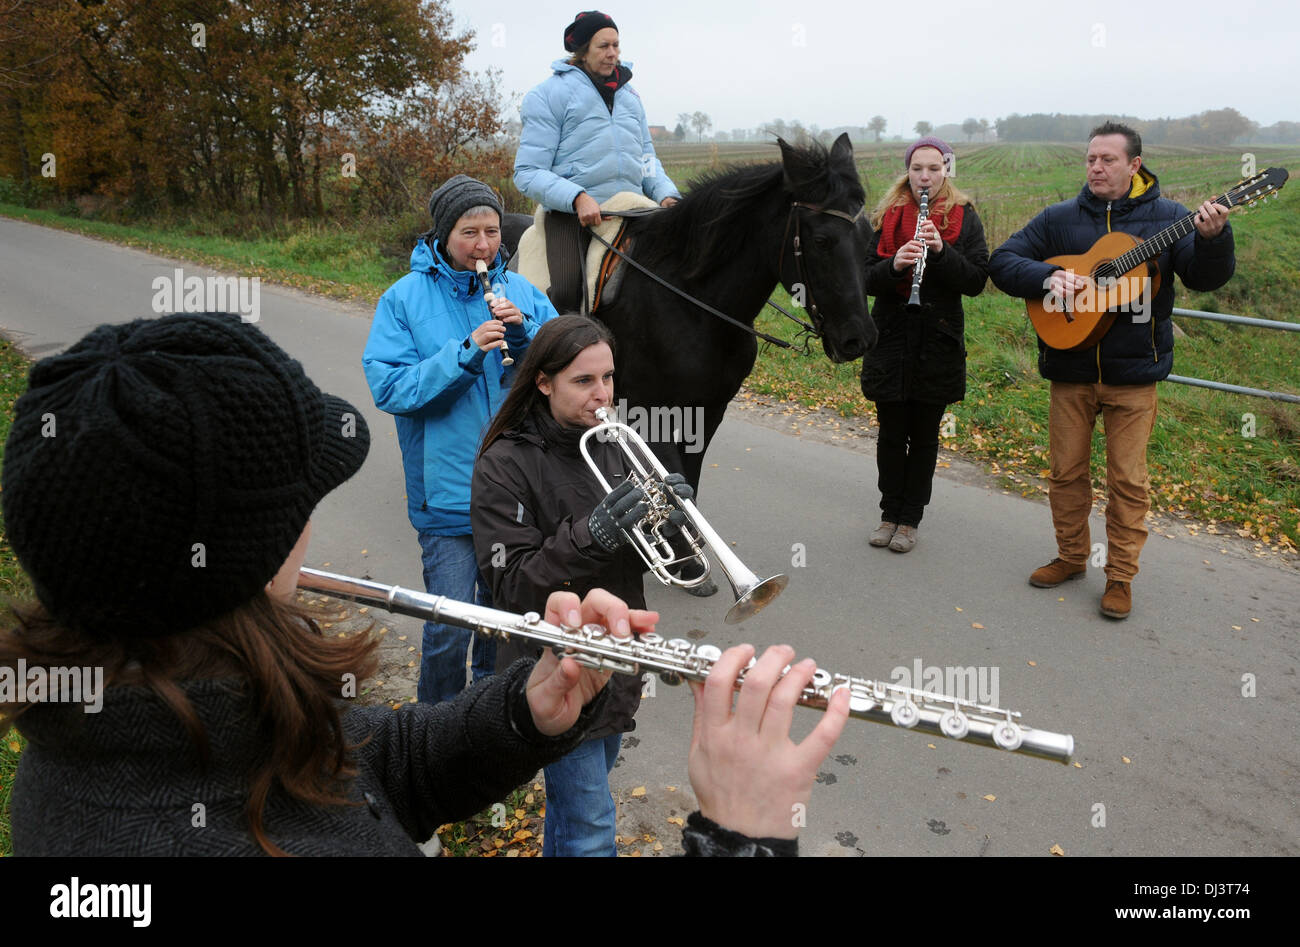 Martfeld, Germany. 16th Nov, 2013. The course director Gwendolyn Schubert plays on her flute to the beat of the hooves of the horse 'Jemala' wich is ridden by Dagmar Fuchs as well as Kristin Mielke on the fipple pipe, Kim Dinter on the trumpet, Stephanie Schmidt on the clarinet and Udo Schneider on the guitar follow the beat in Martfeld, Germany, 16 November 2013. The course shows musicians how to follow the beat of the gait of a horse, which then can be considers as a conductor. Photo: Ingo Wagner/dpa/Alamy Live News Stock Photo